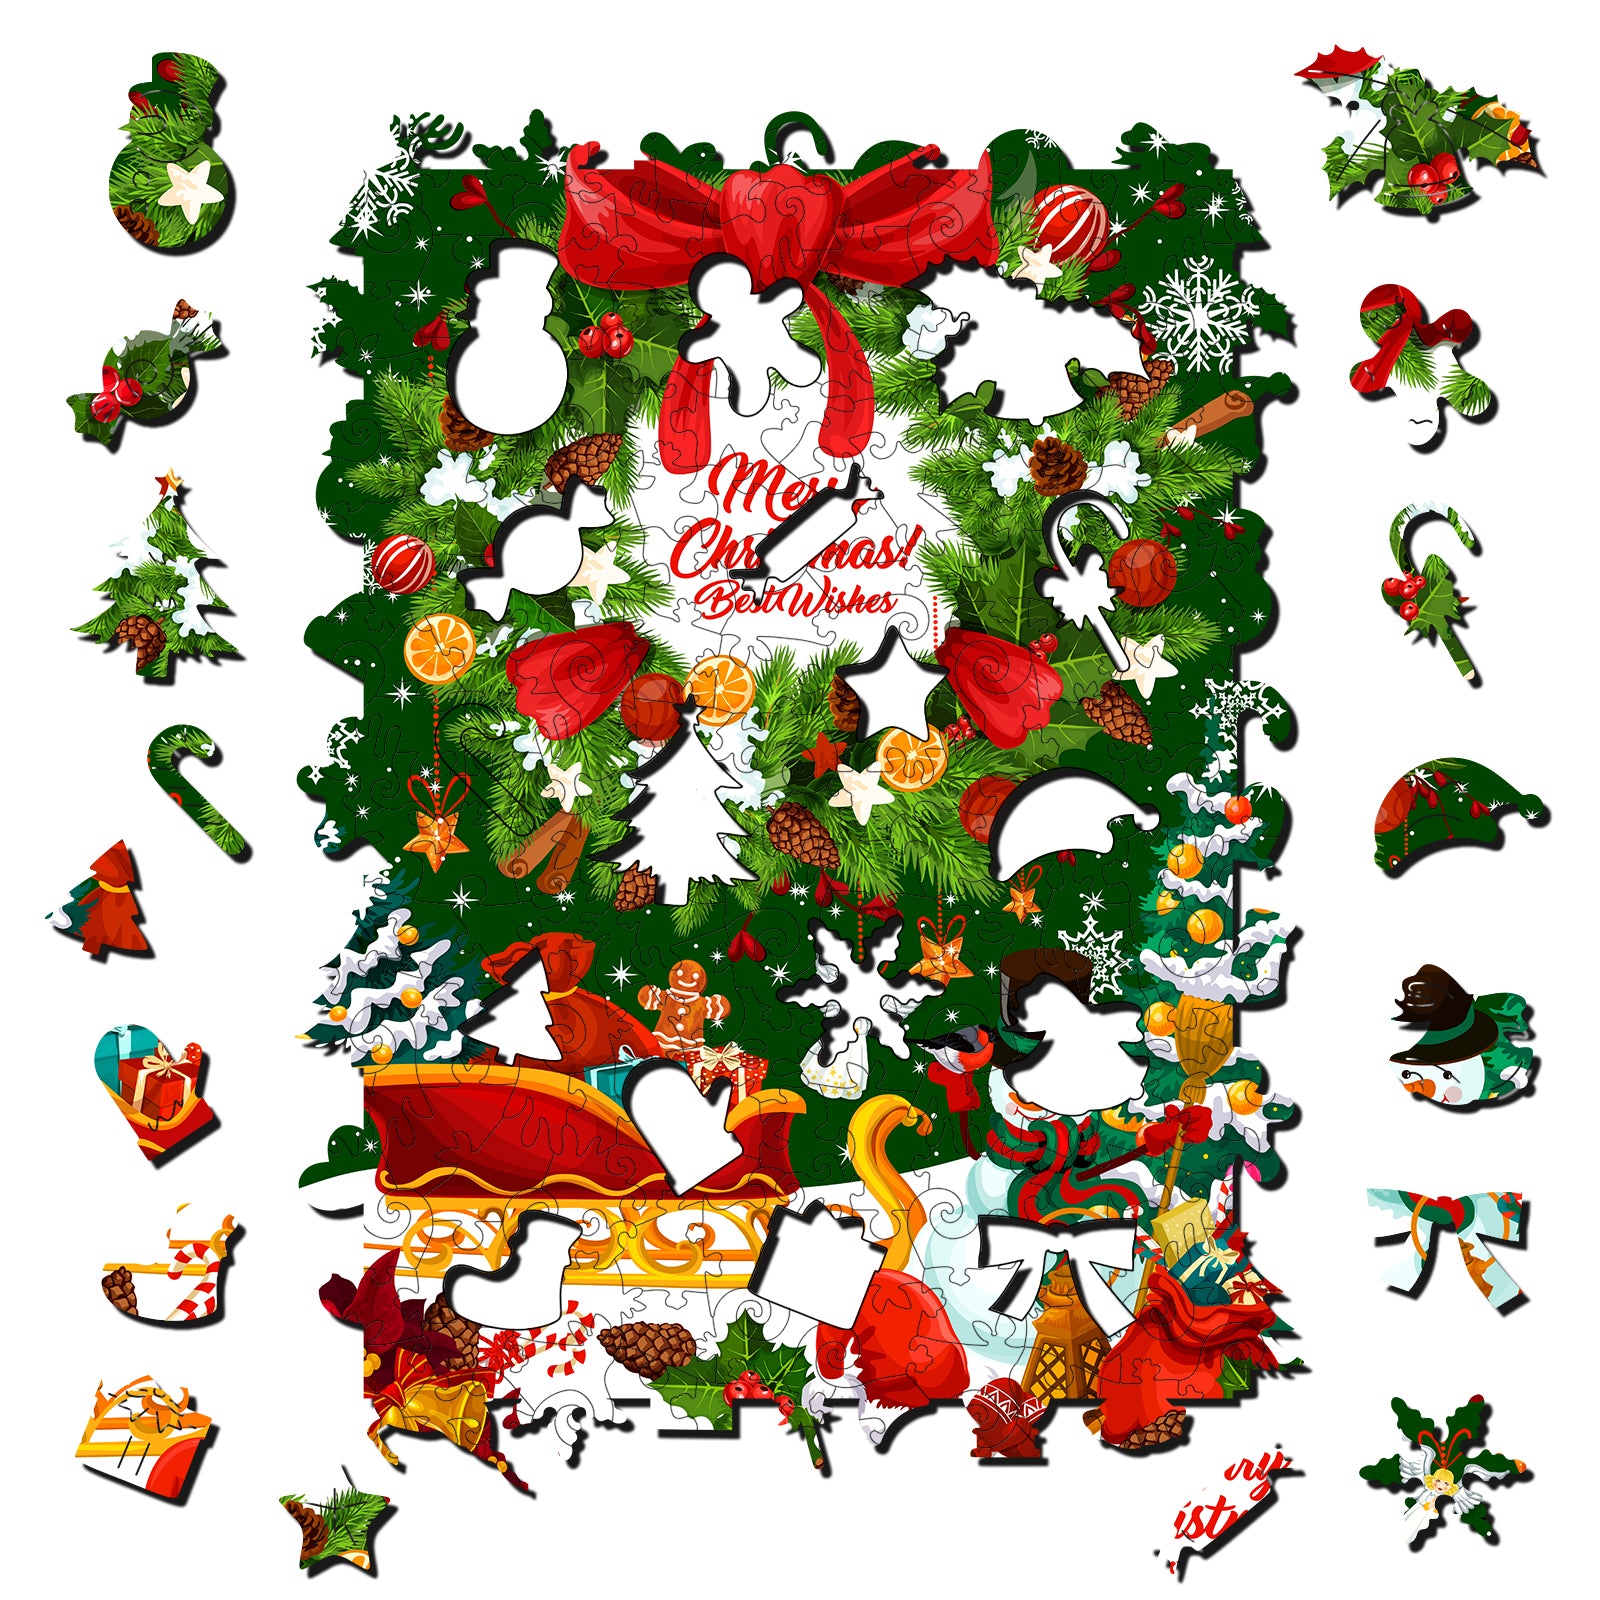 Merry Christmas Wooden Jigsaw Puzzle